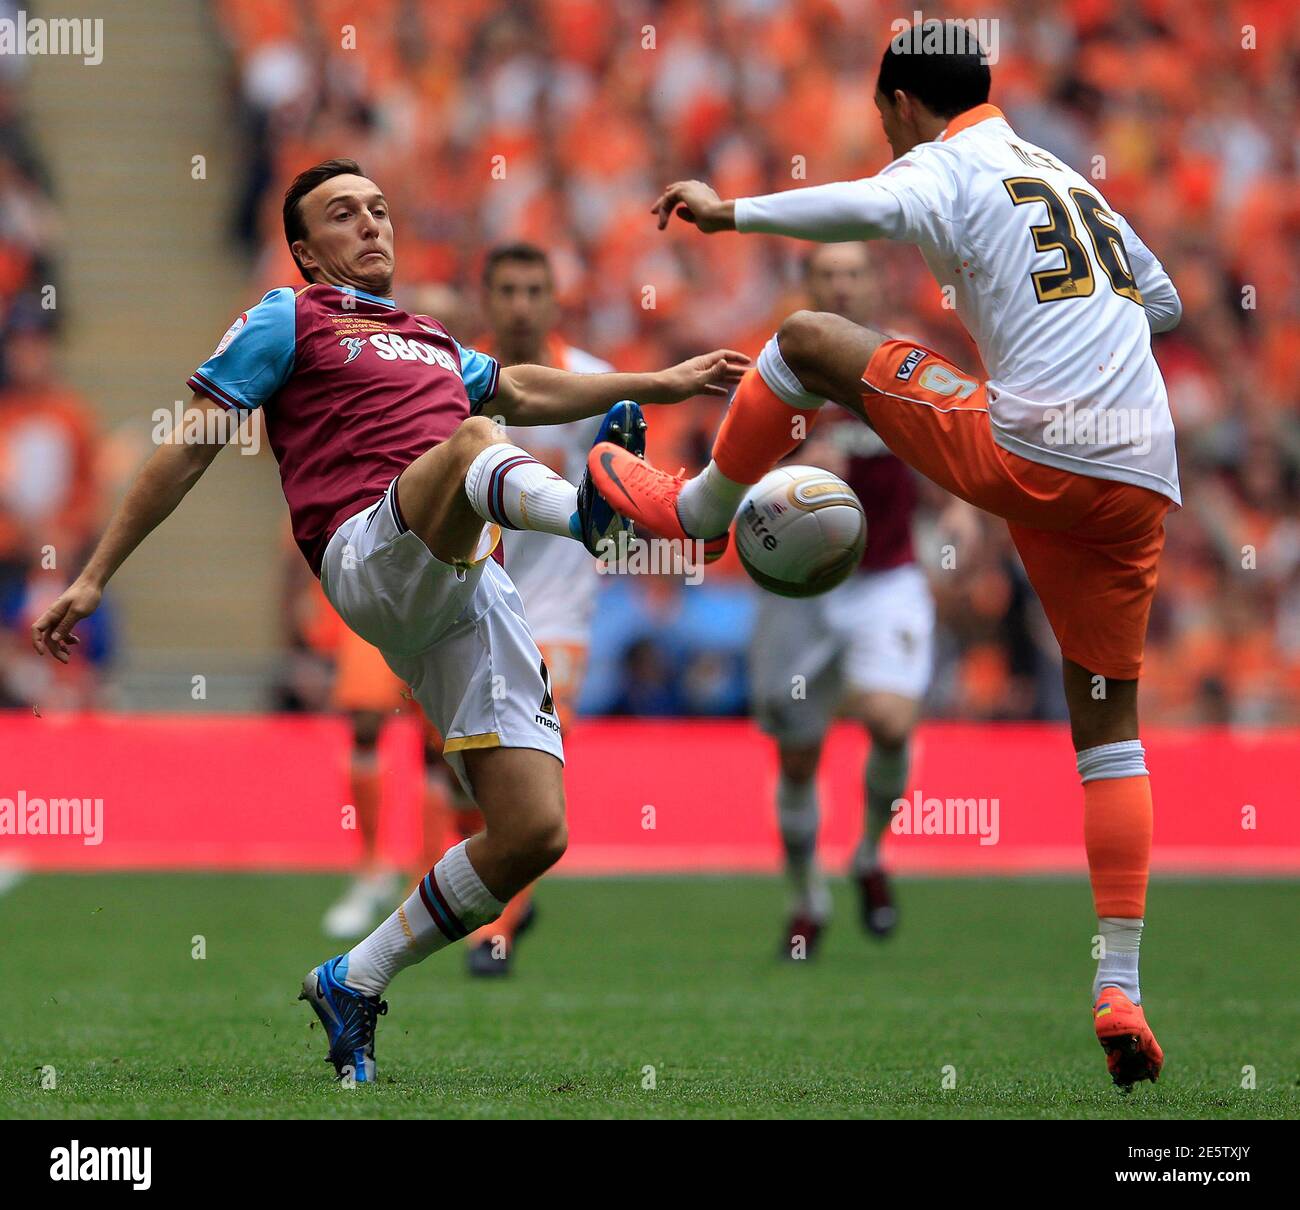 Blackpool's Thomas Ince (R) challenges West Ham United's Mark Noble during their English Championship play-off final soccer match at Wembley Stadium in London May 19, 2012. REUTERS/Eddie Keogh (BRITAIN - Tags: SPORT SOCCER) Stock Photo